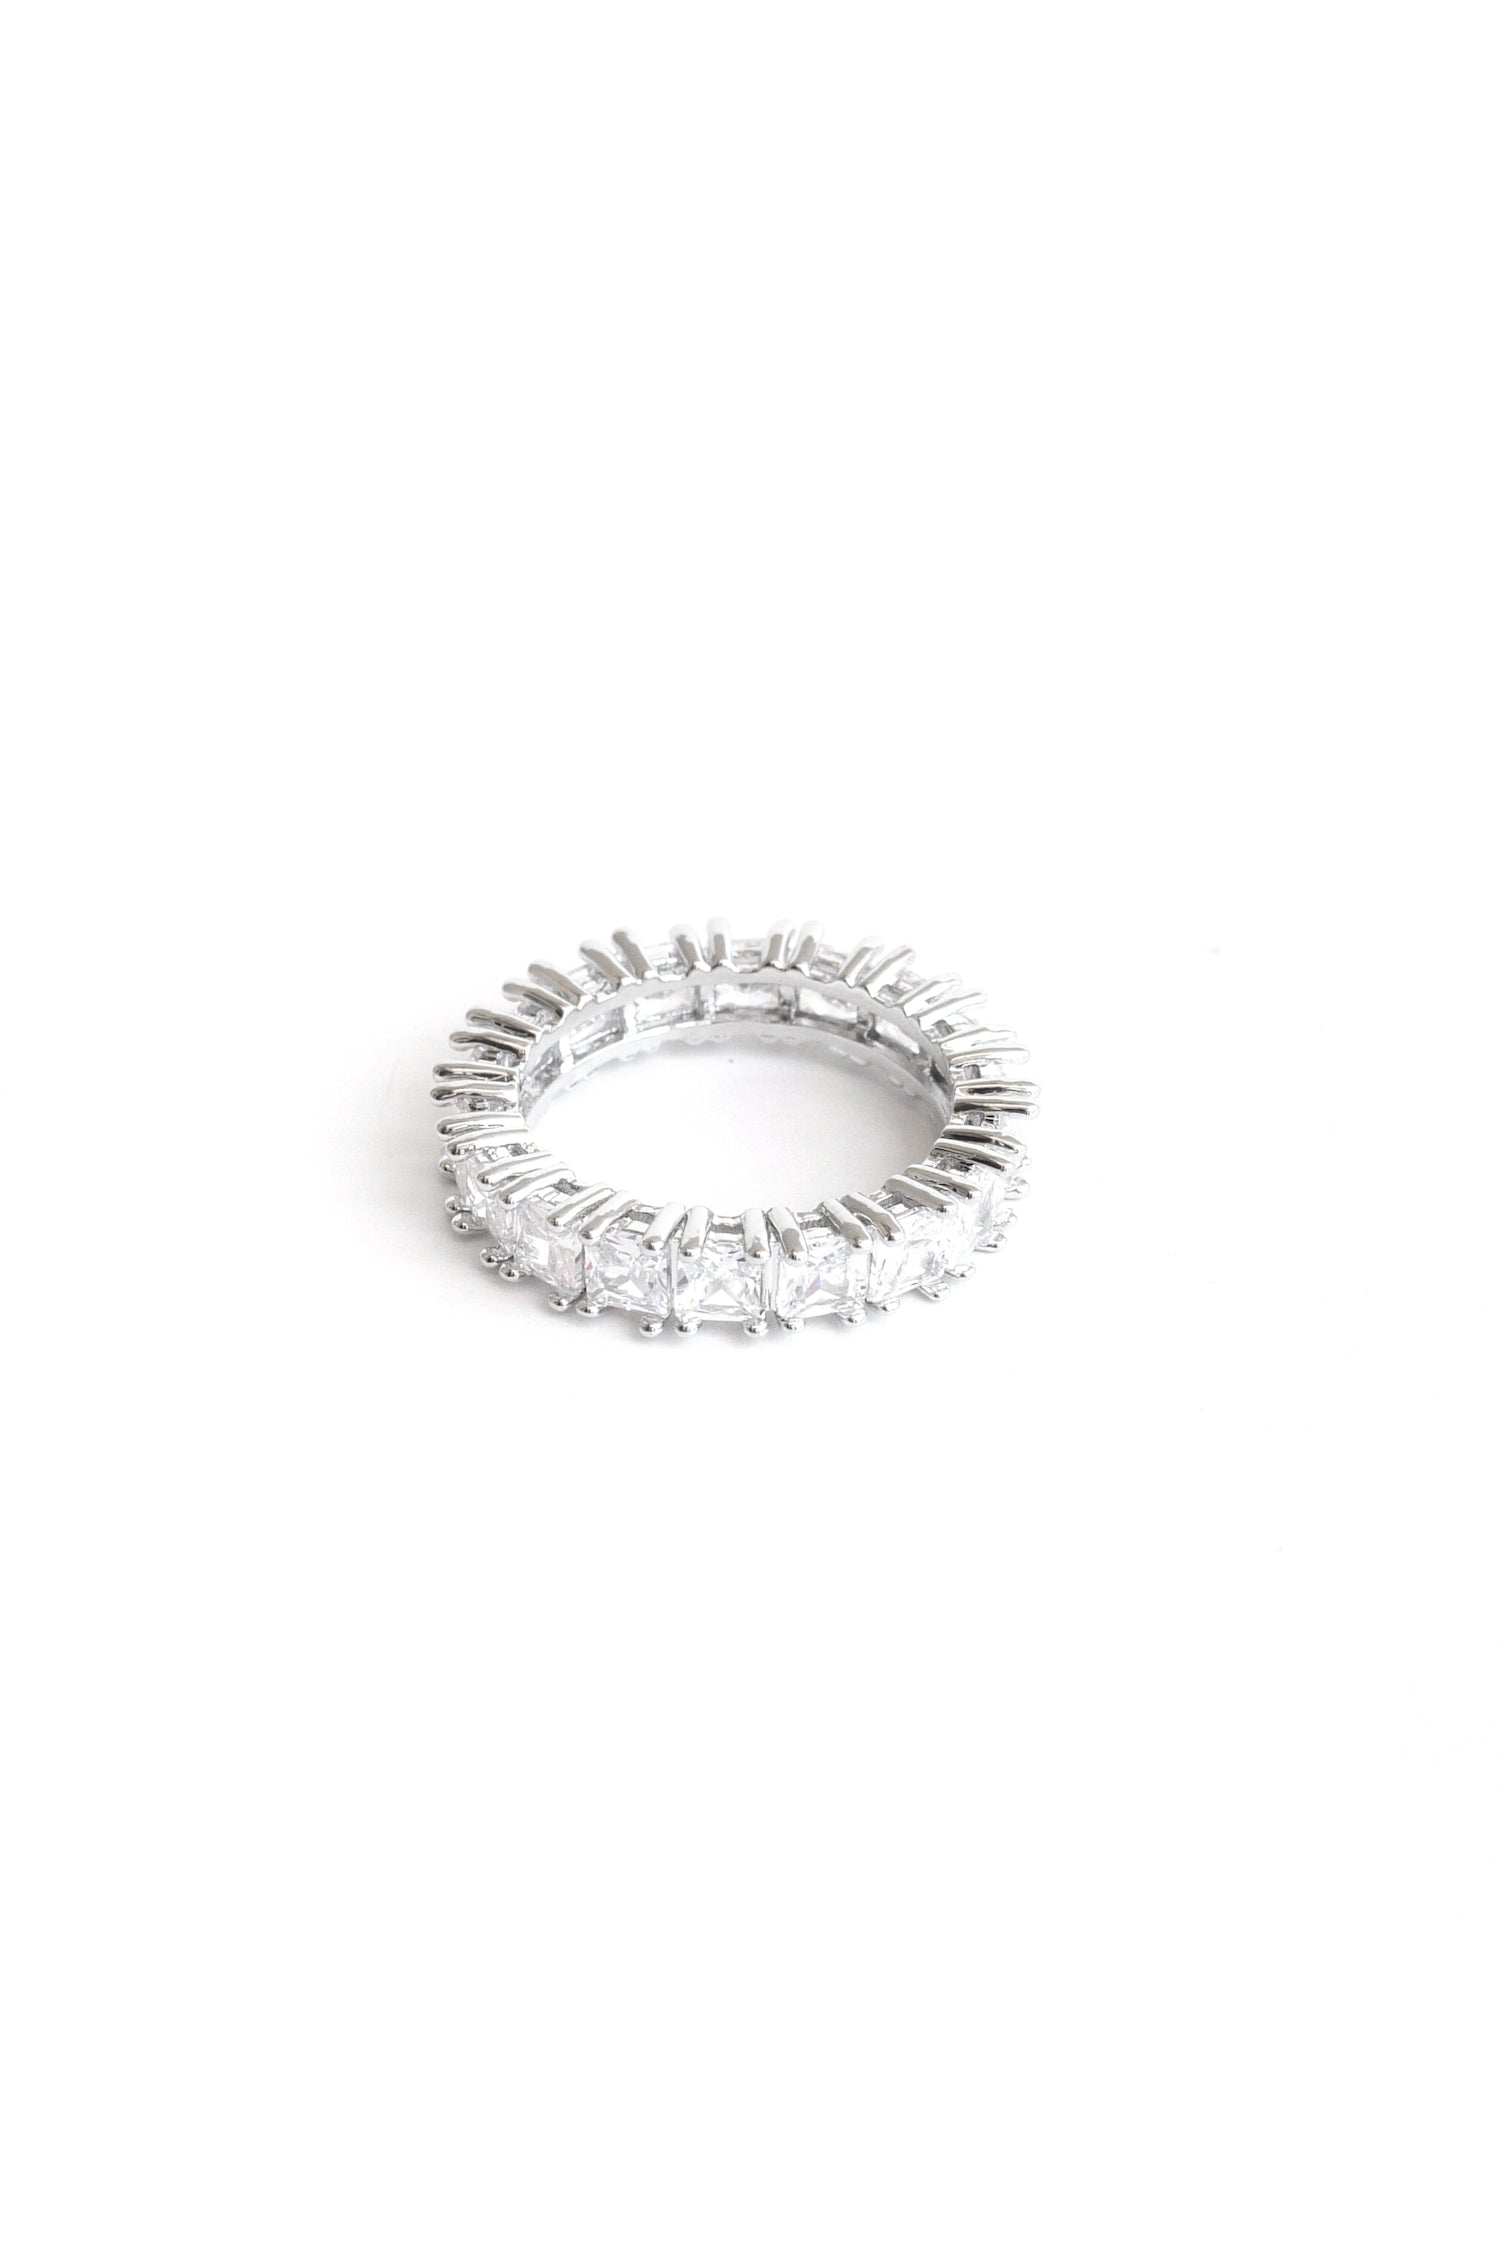 Radiant Ice ring laying flat against a white background